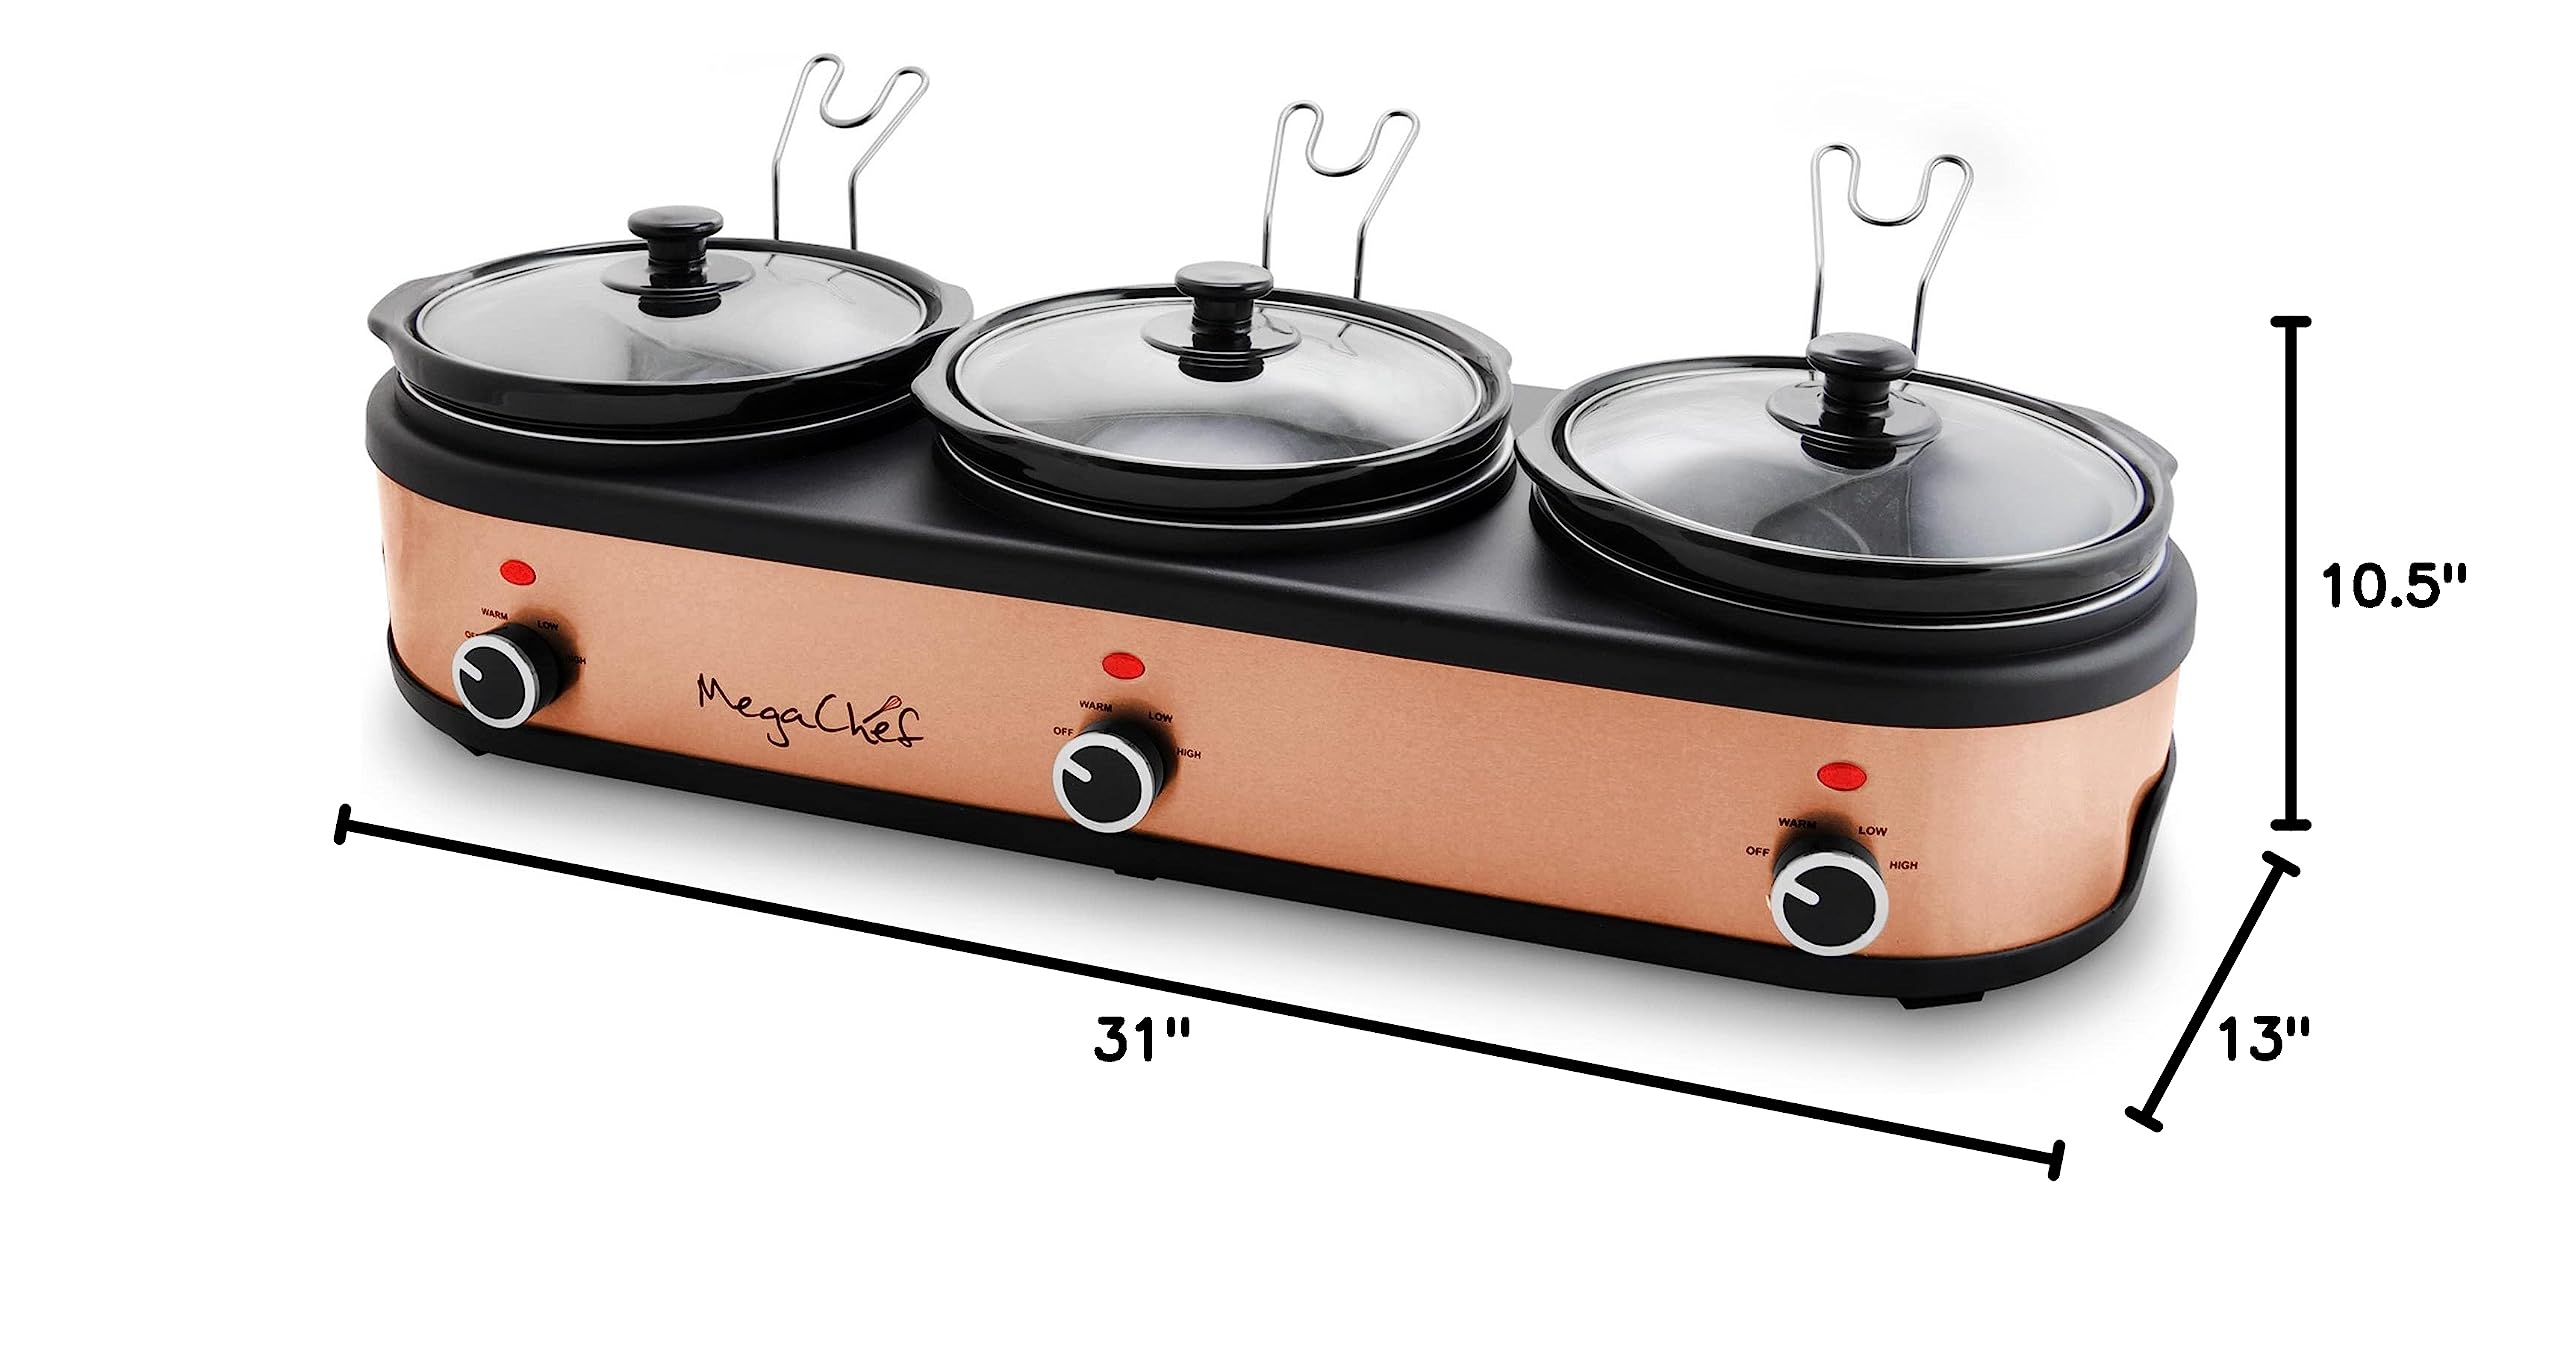 Megachef Triple 2.5 Quart Slow Cooker and Buffet Server in Brushed Copper and Black Finish with 3 Ceramic Cooking Pots and Removable Lid Rests